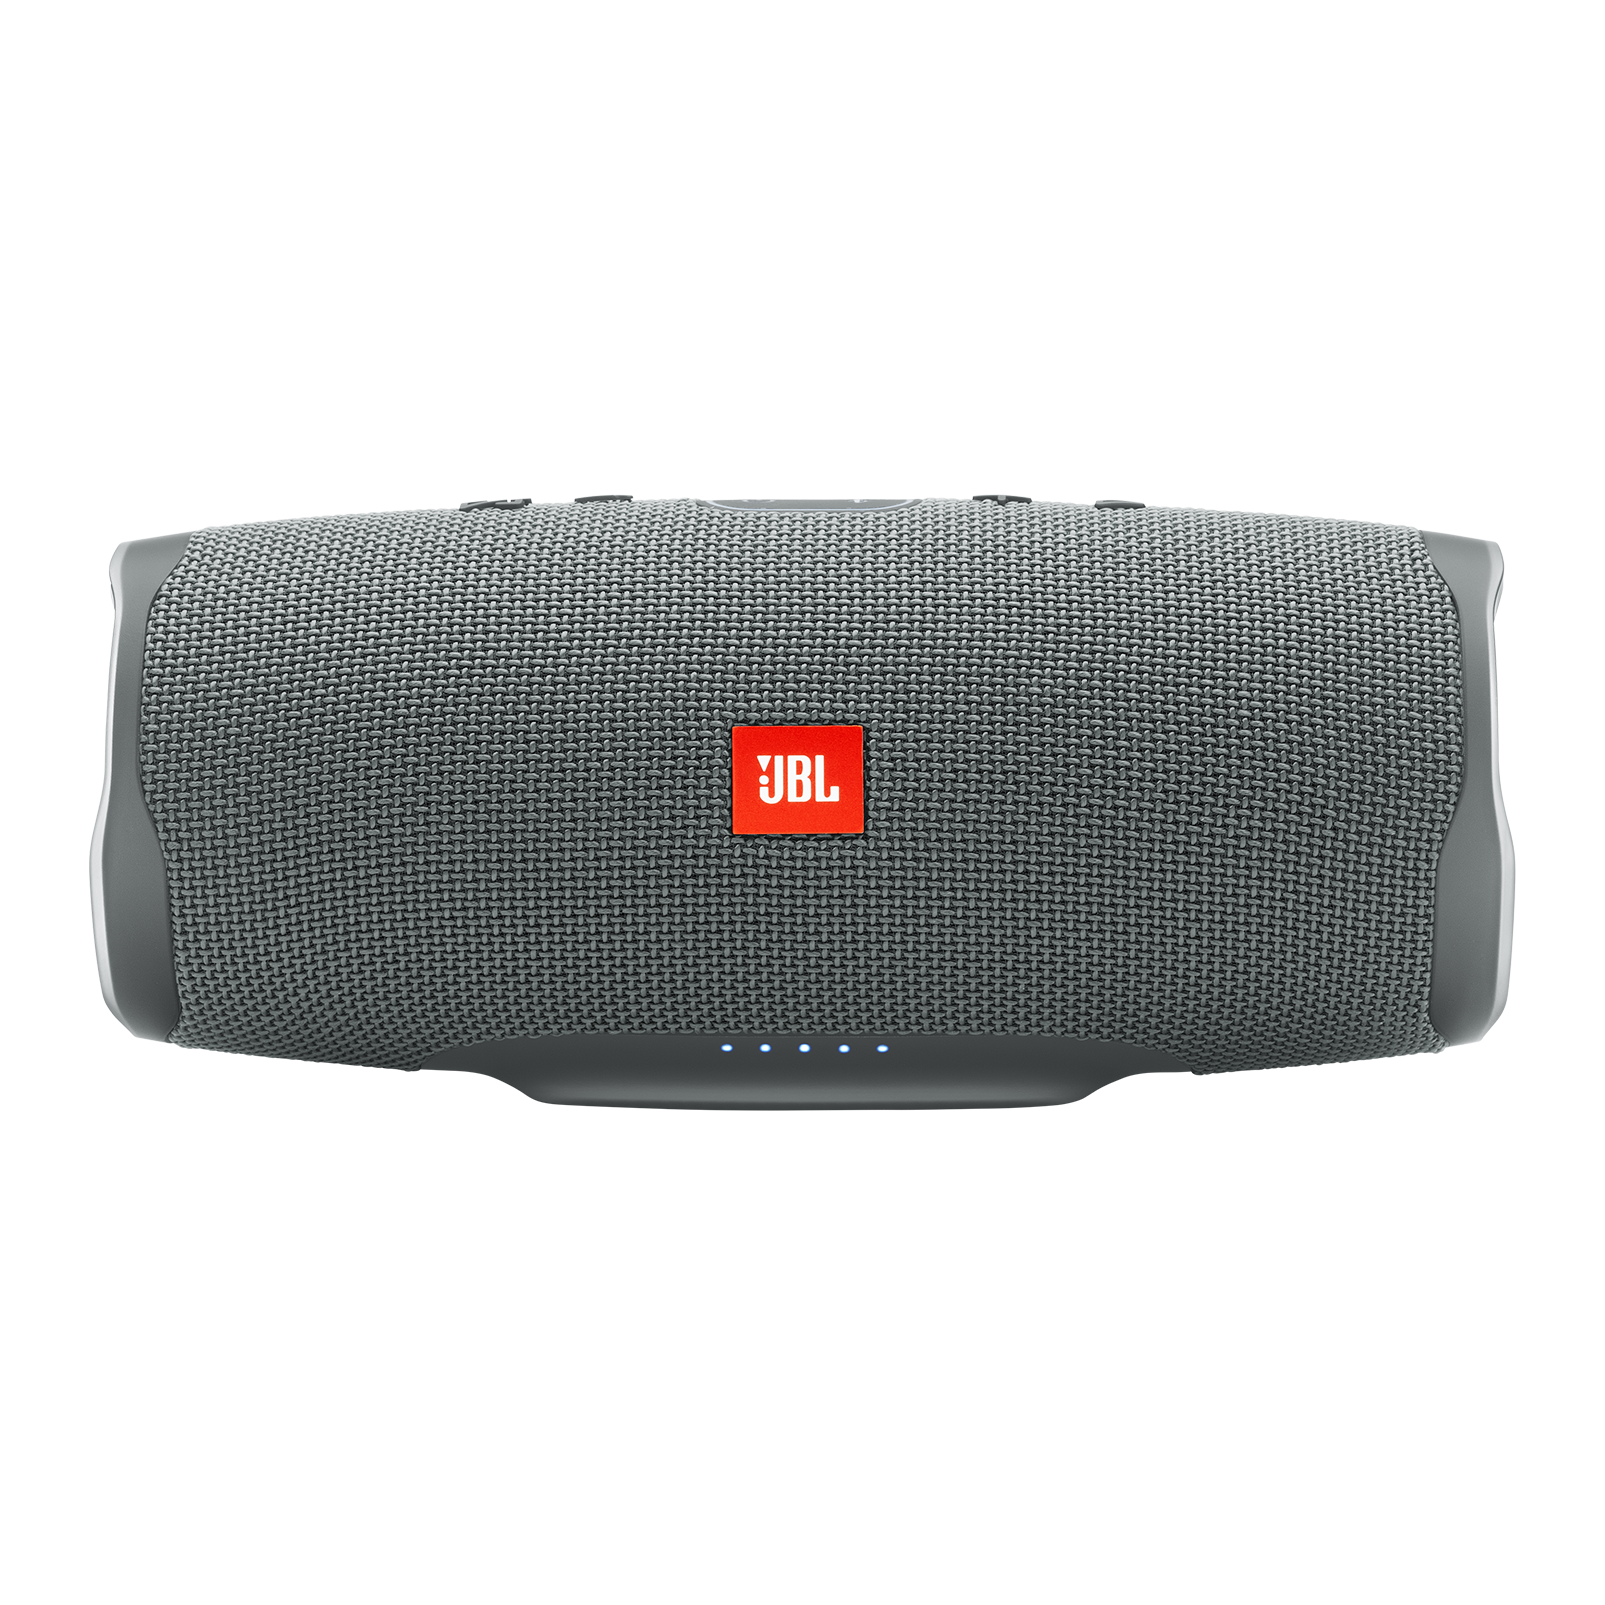 JBL_Charge4_Front_DarkGrey-1605x1605px